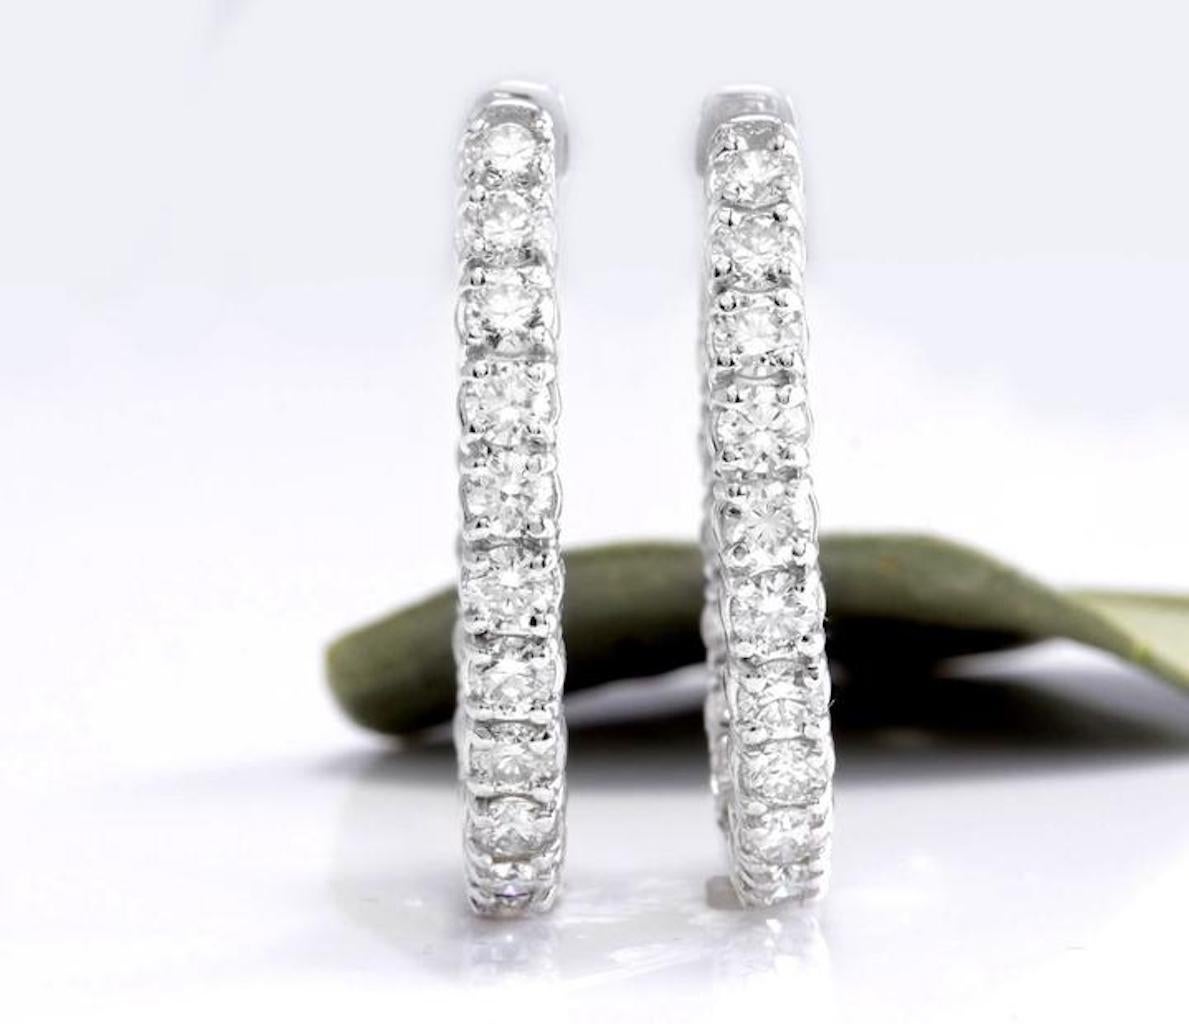 Exquisite 3.25 Carats Natural Diamond 14K Solid White Gold Hoop Earrings

Amazing looking piece!

Inside Out Diamonds.

Earrings have safety lock.

Total Natural Round Cut White Diamonds Weight: Approx. 3.25 Carats (color H / Clarity